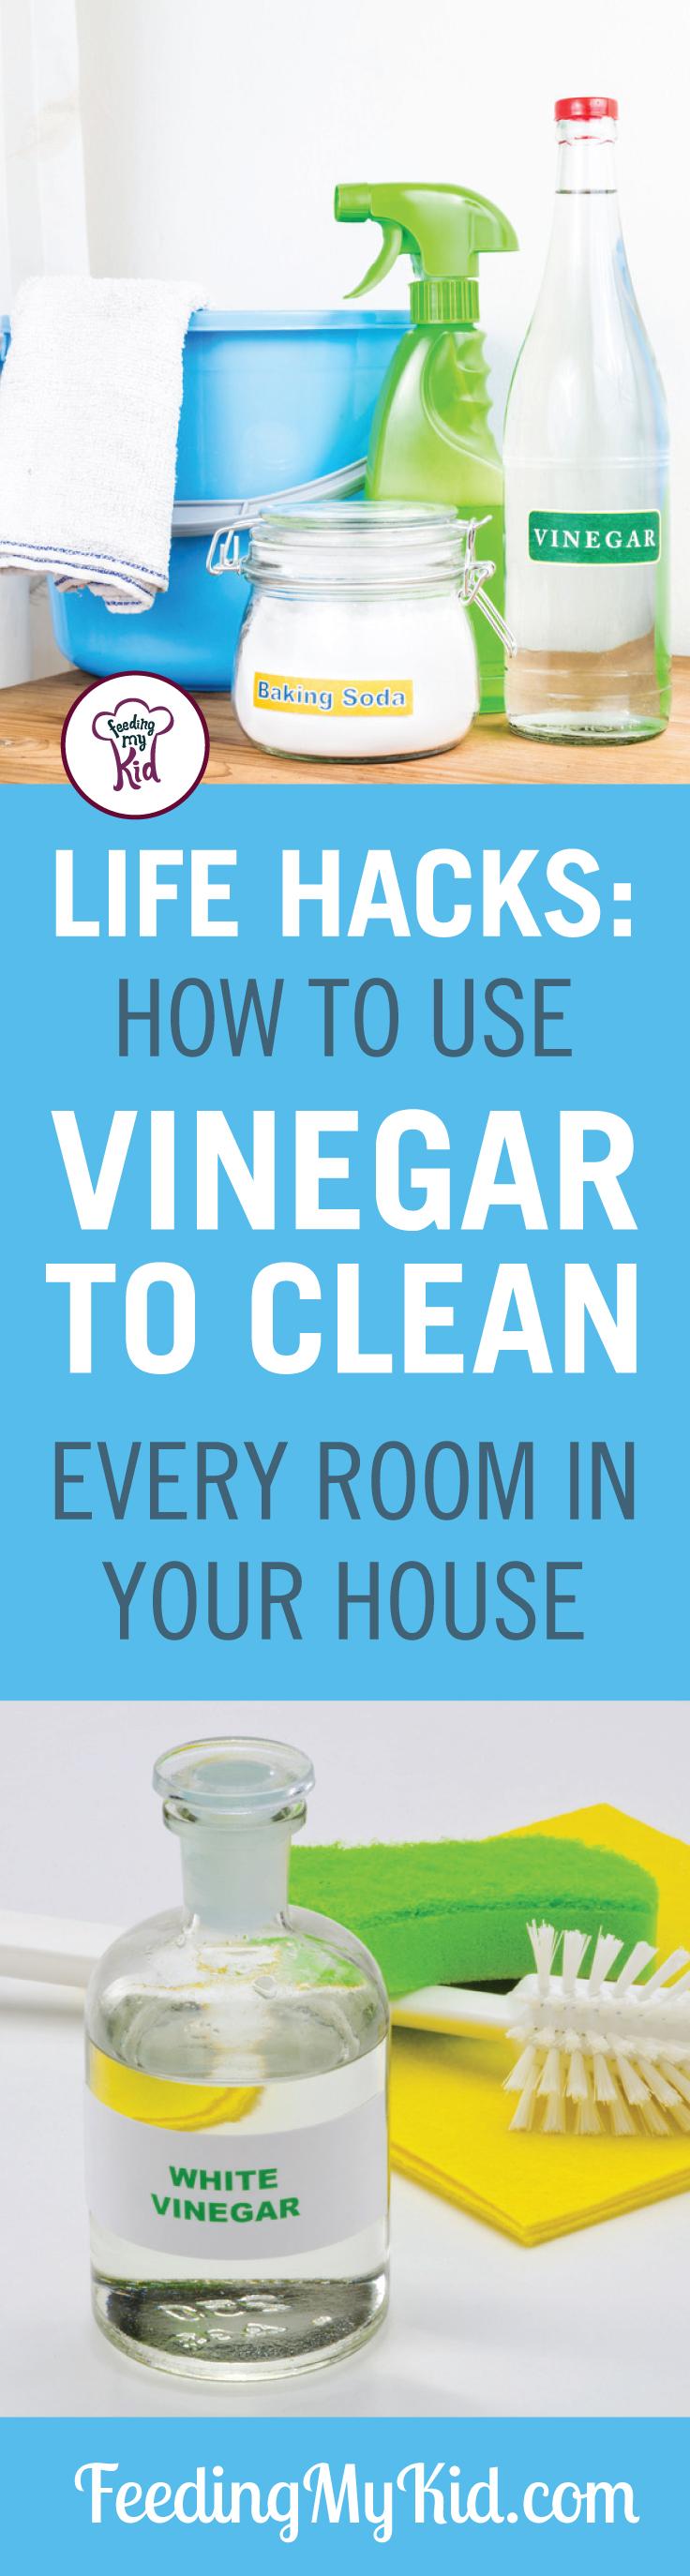 Cleaning with vinegar? Our grandmothers swore by it and we continue to carry the tradition today. But what's the rave on vinegar? Feeding My Kid is a filled with all the information you need about how to raise your kids, from healthy tips to nutritious recipes.#FeedingMyKid #cleaningwithvinegar #cleaning